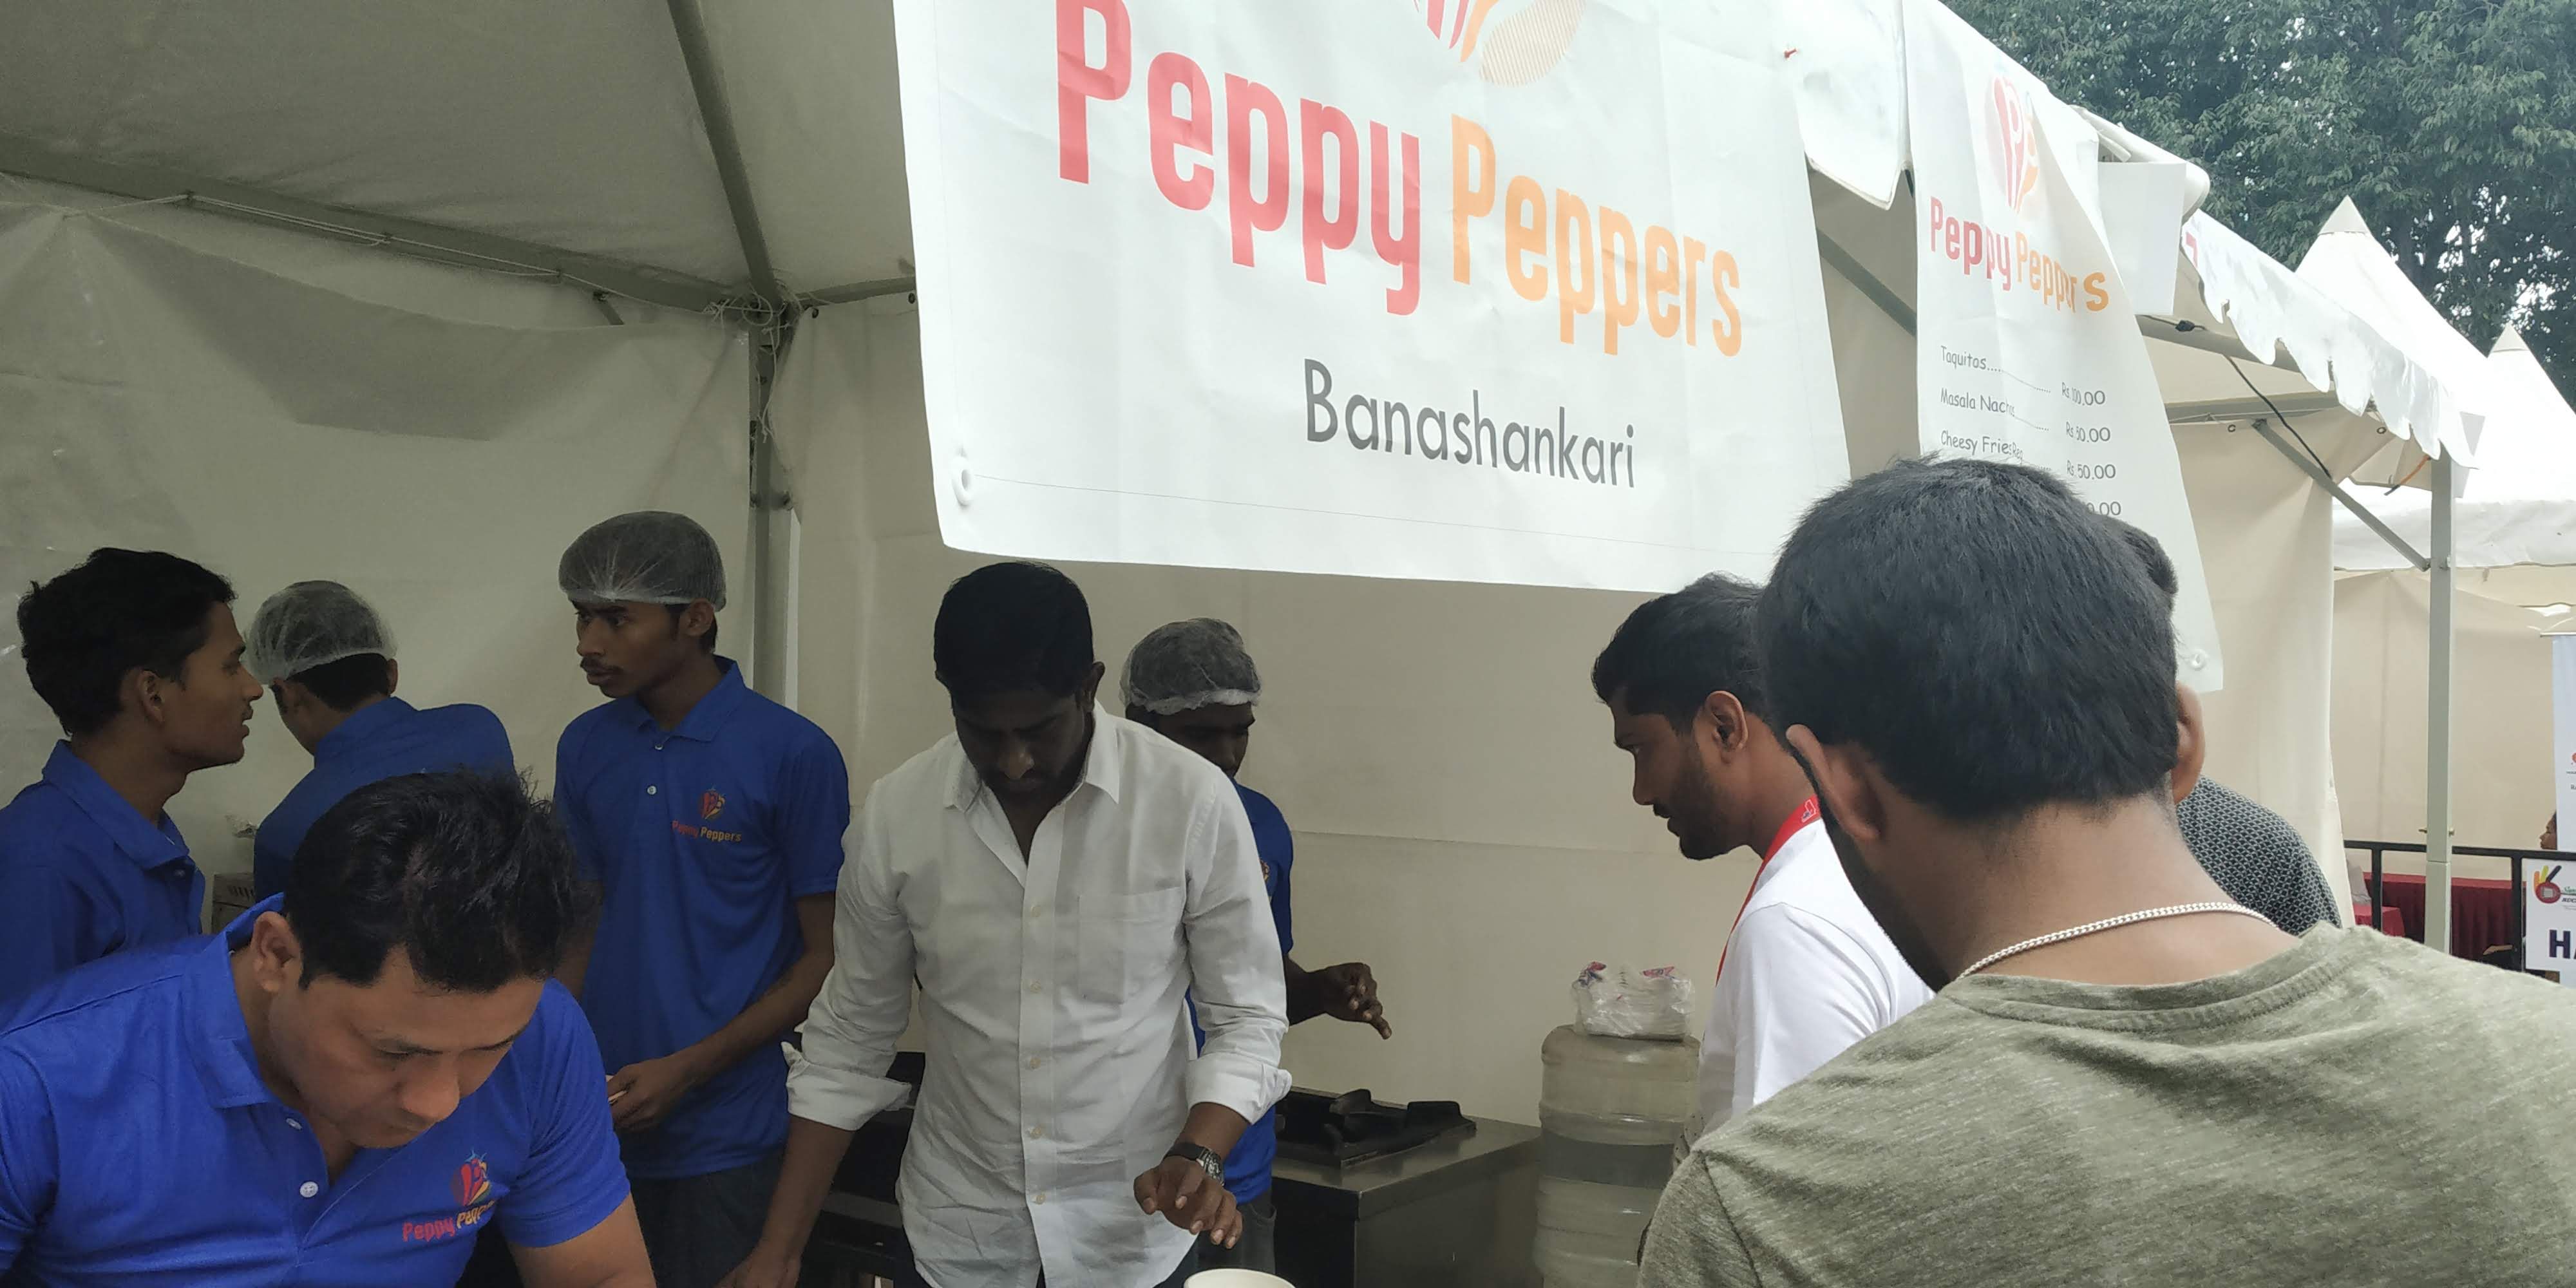 Picture of Peppy Peppers stall